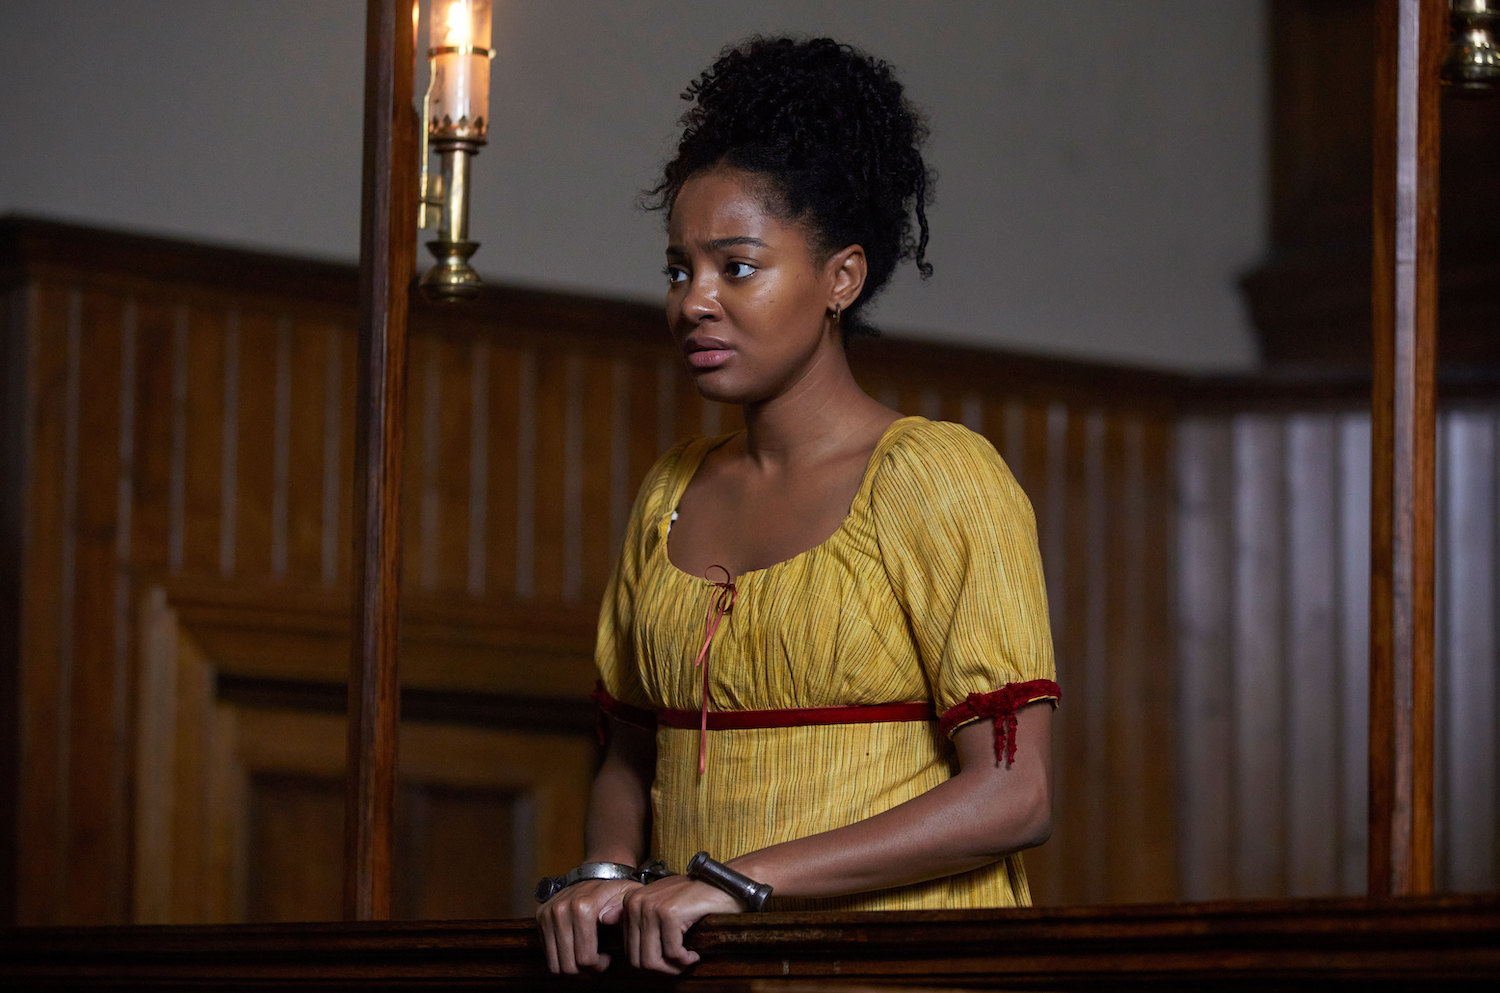 Karla-Simone Spence in "The Confessions of Frannie Langton"